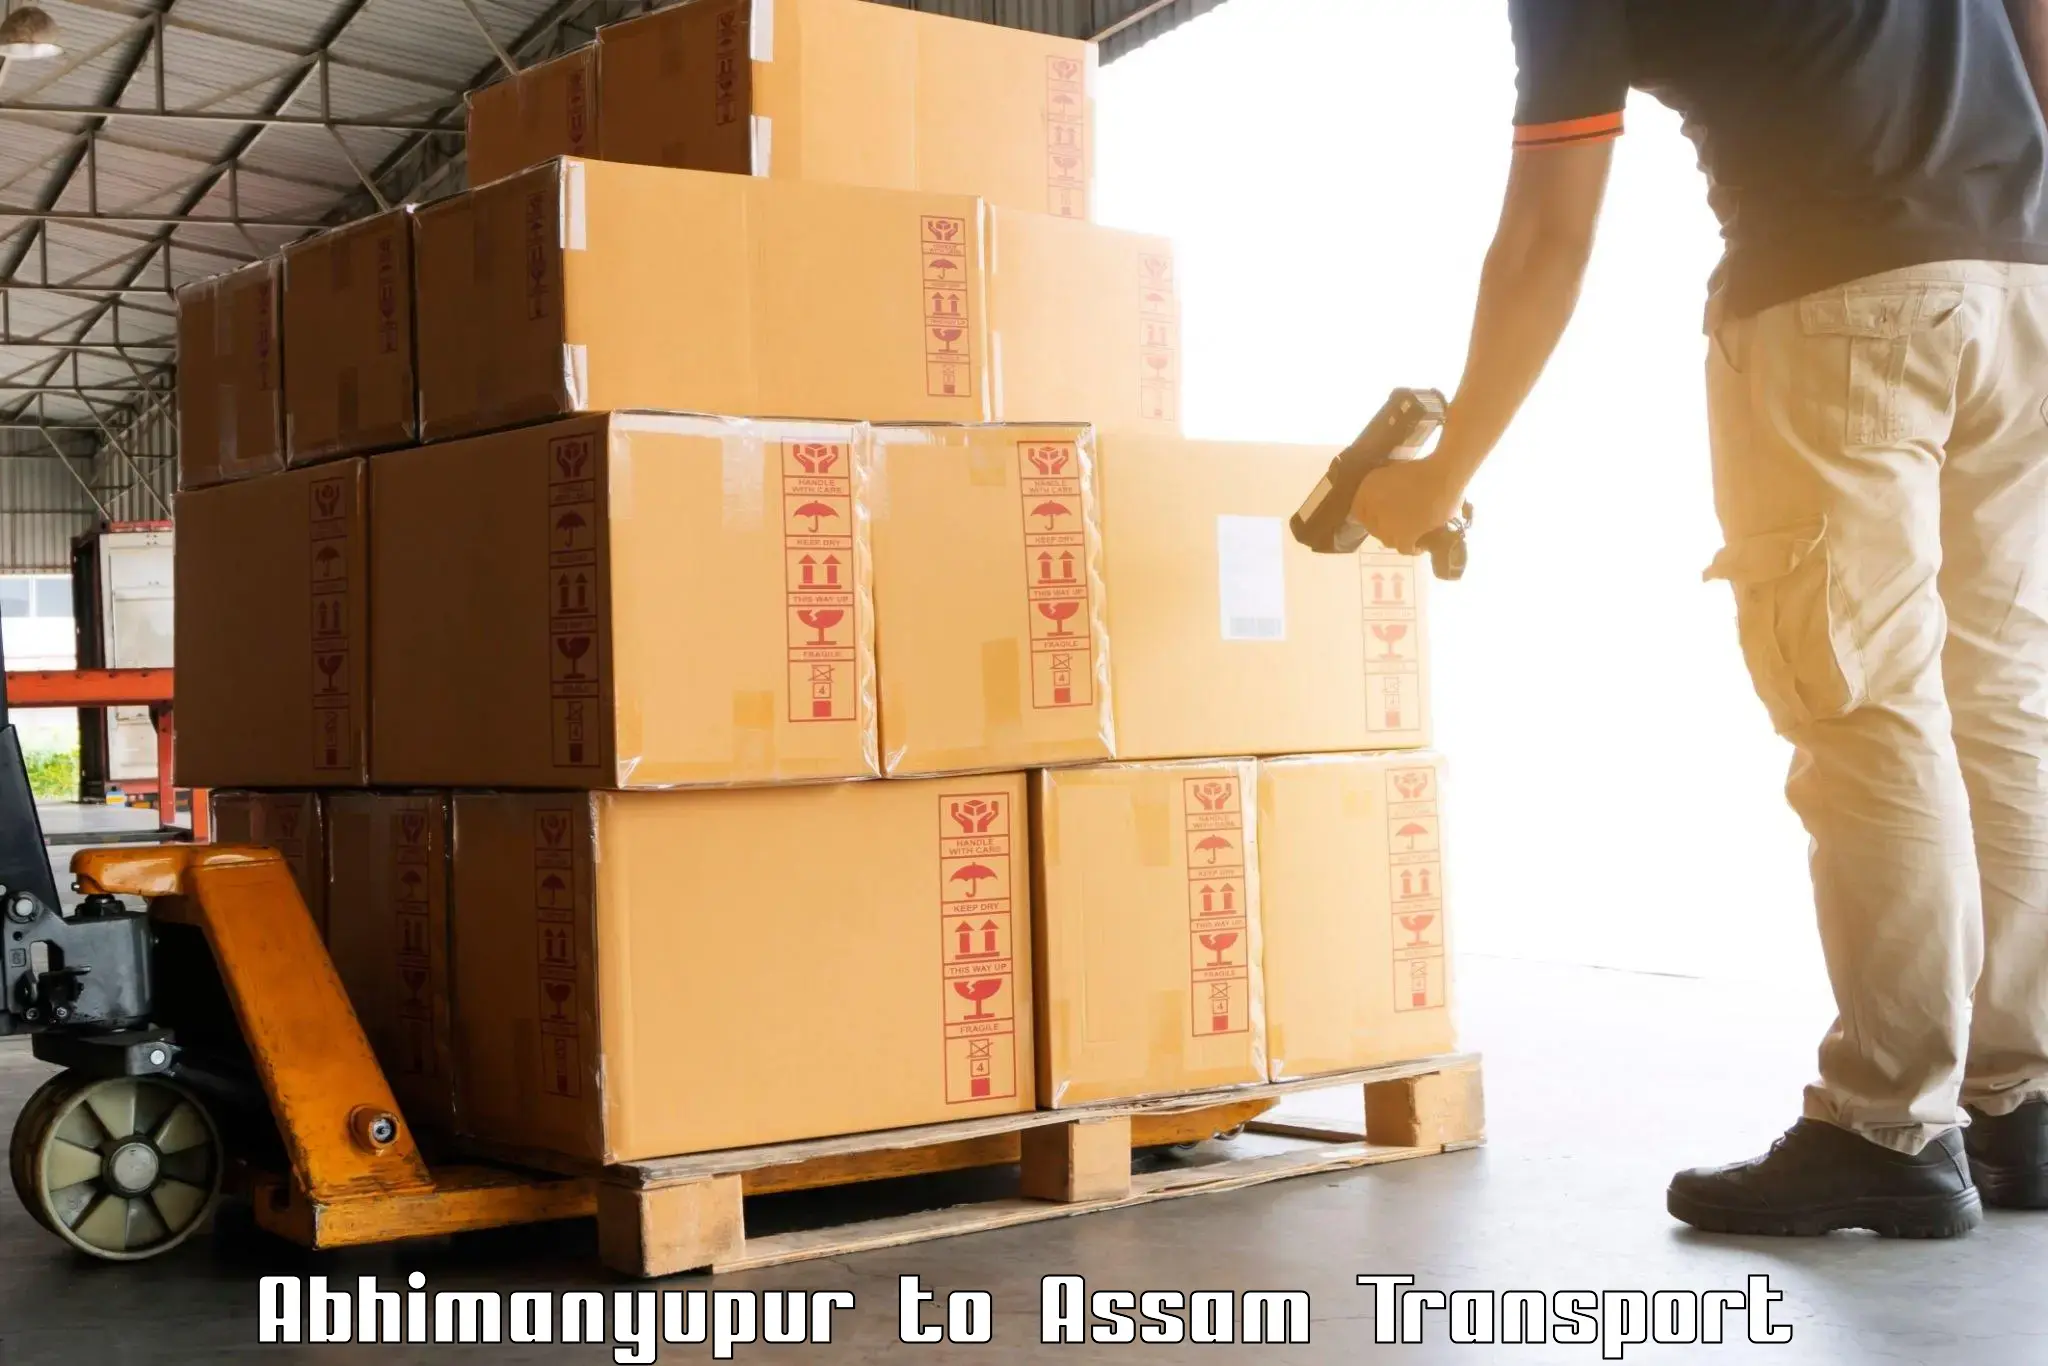 Container transport service Abhimanyupur to Assam